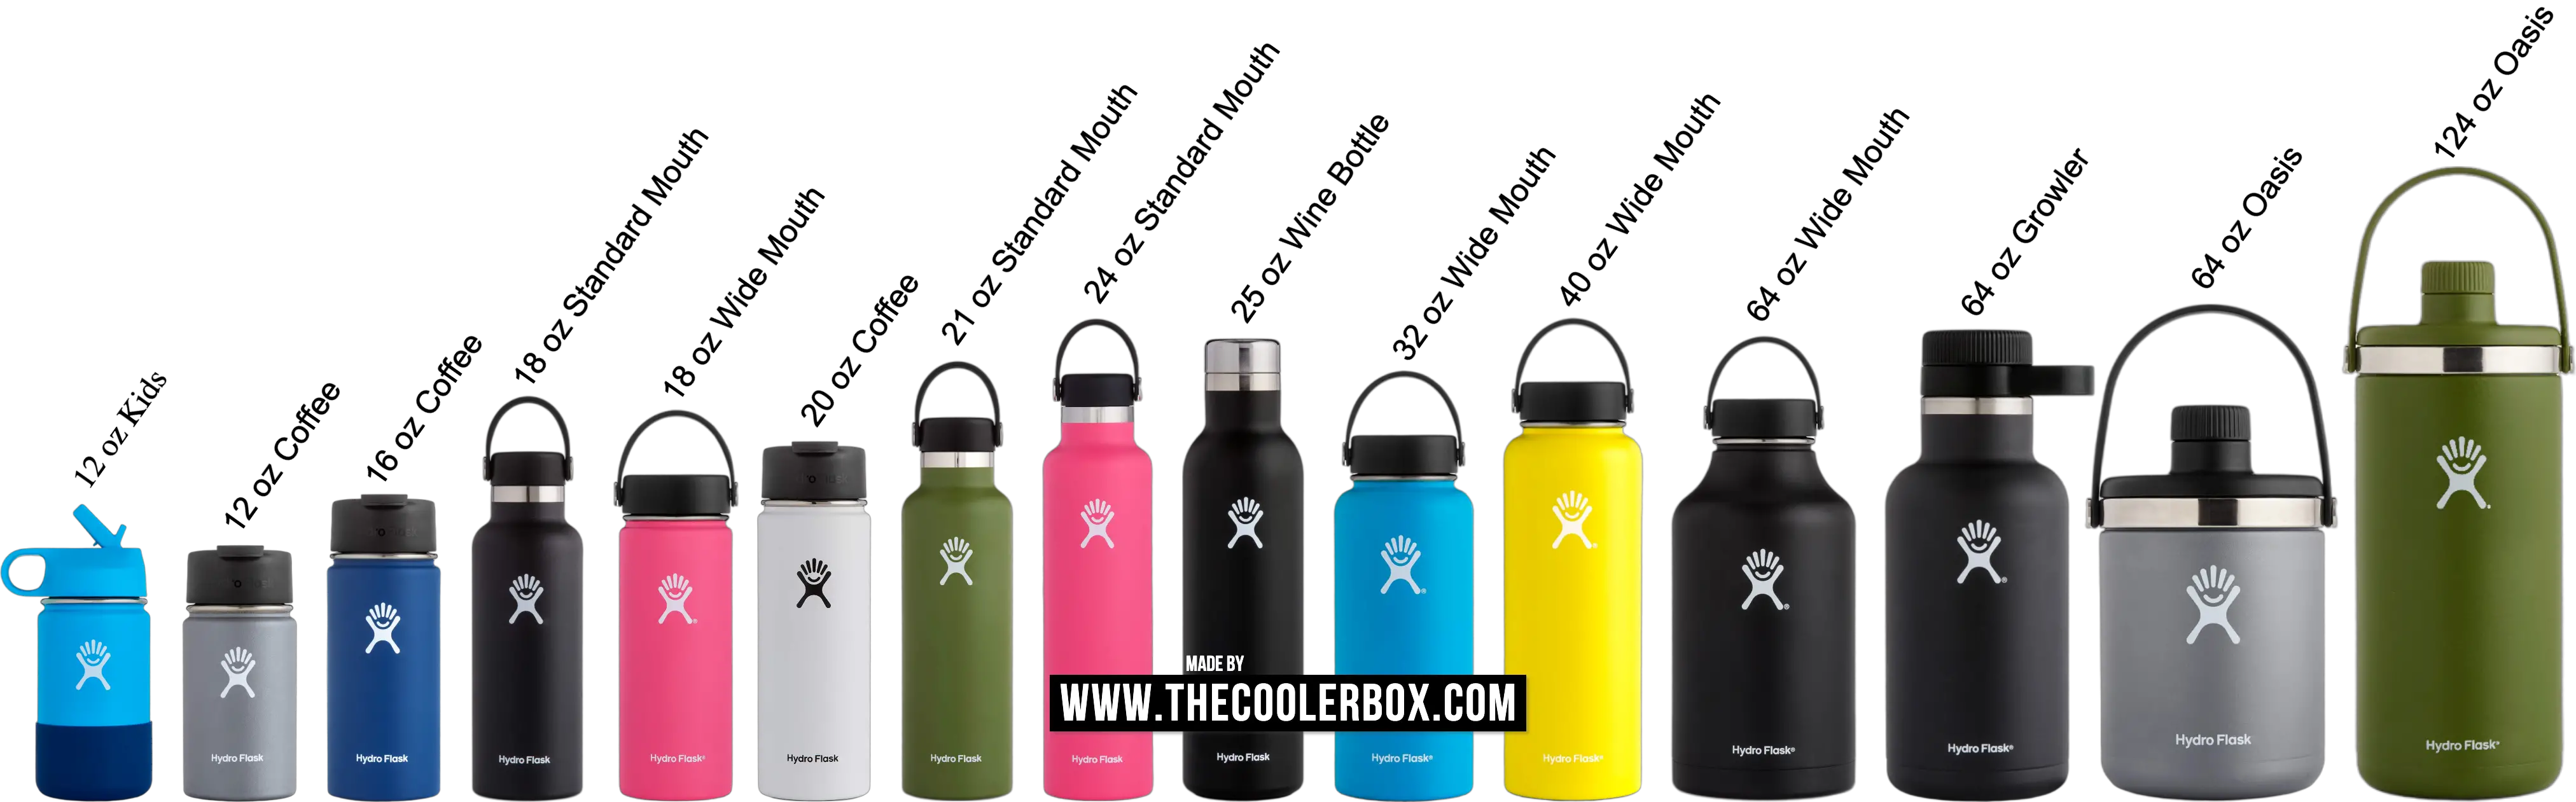 How Many Hydro Flask Sizes Are There?